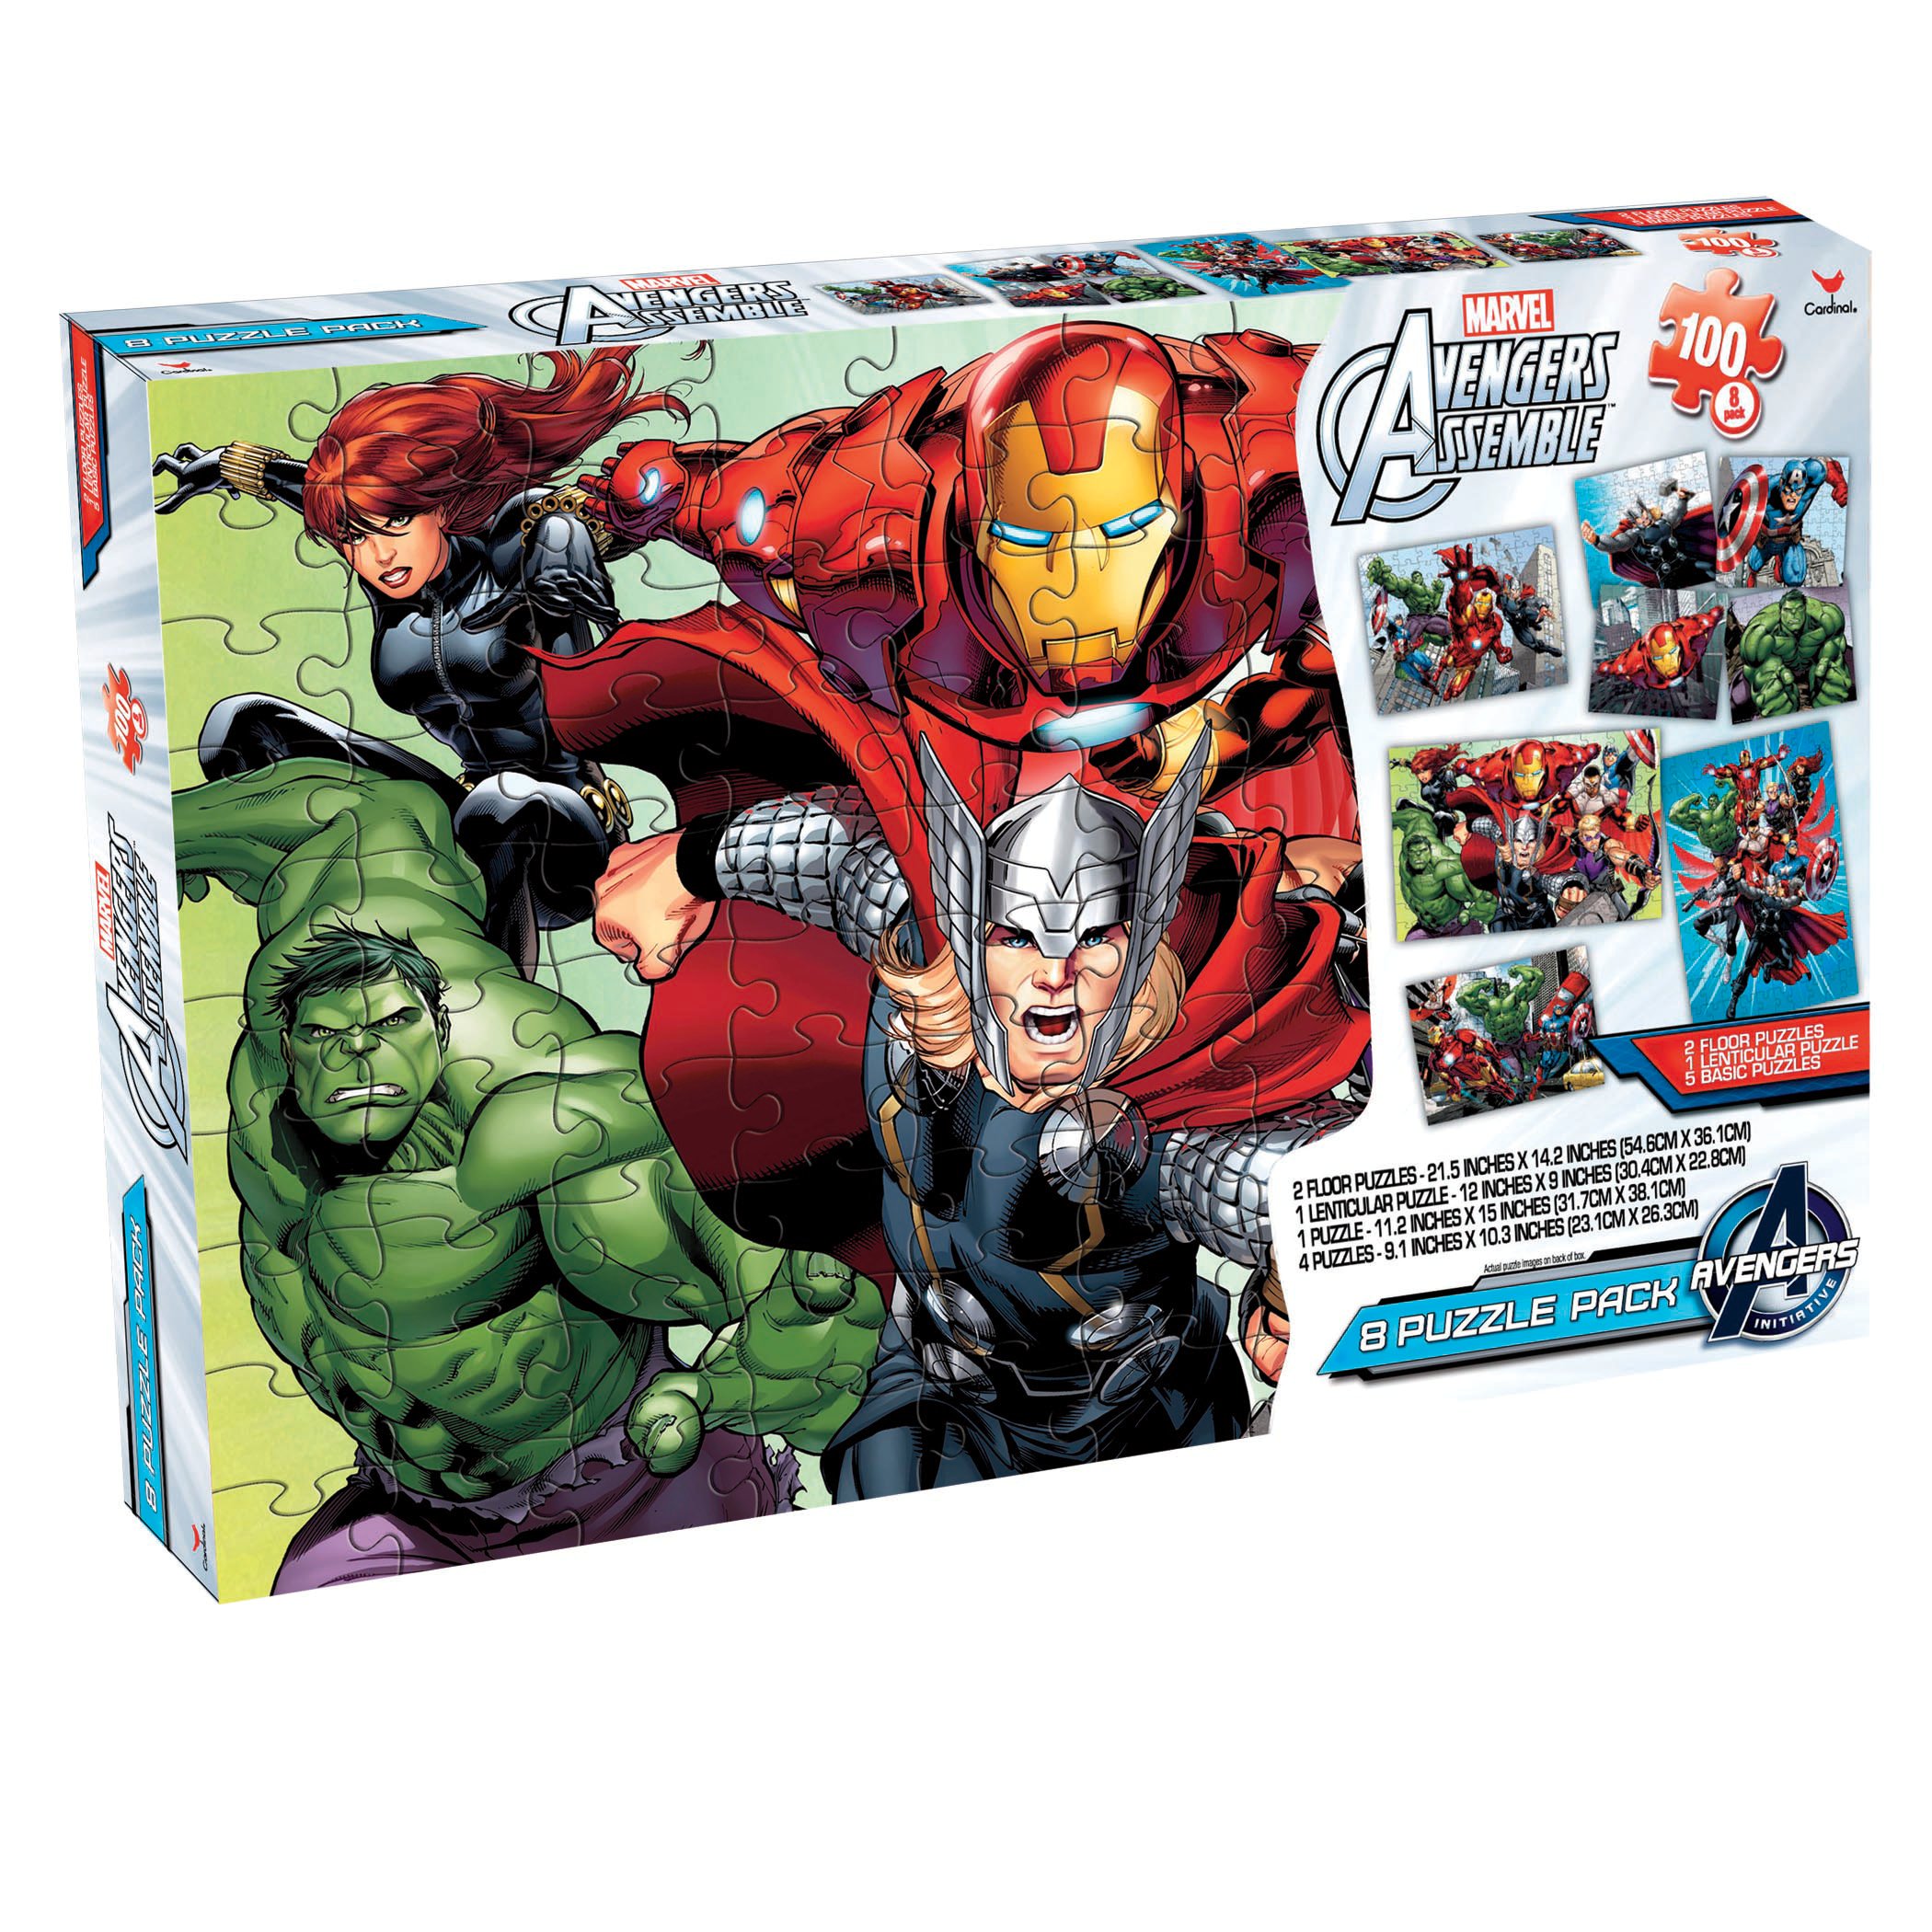 Details about   NEW Cardinal Set of 2 100 Piece Puzzles Spiderman & Avengers Infinity War